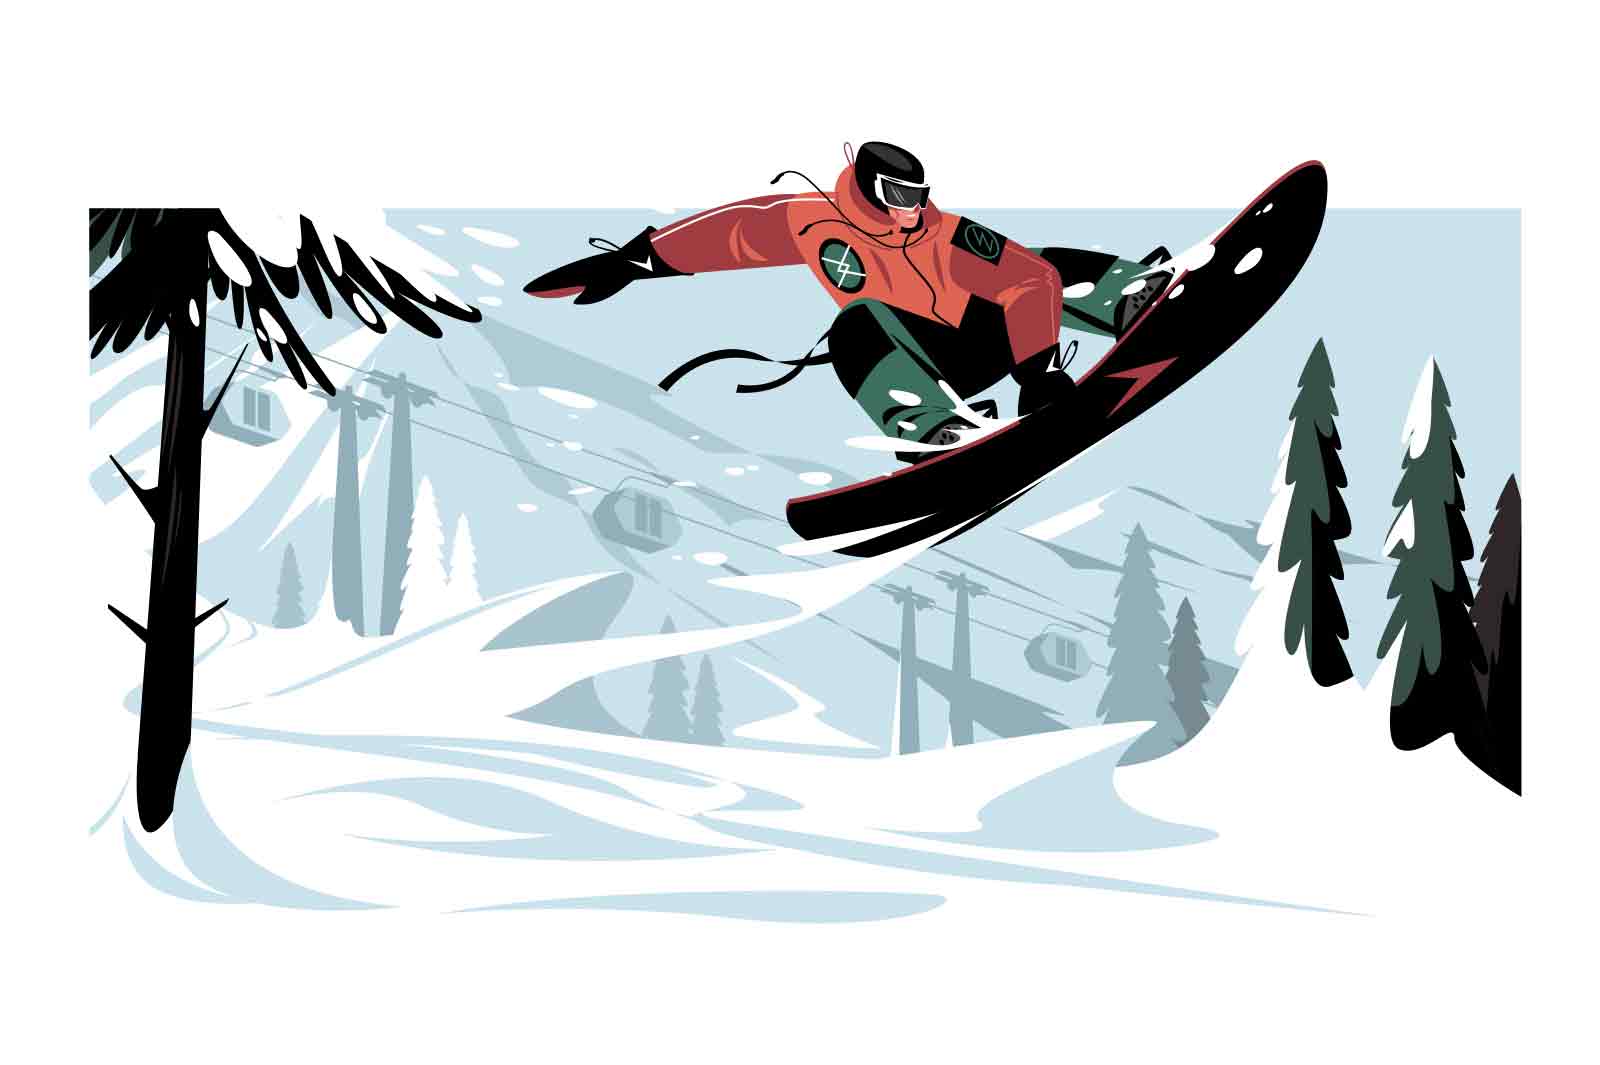 Snowboarder jumping on snowy mountains background vector illustration. Man with snowboard flat style. Winter sport concept